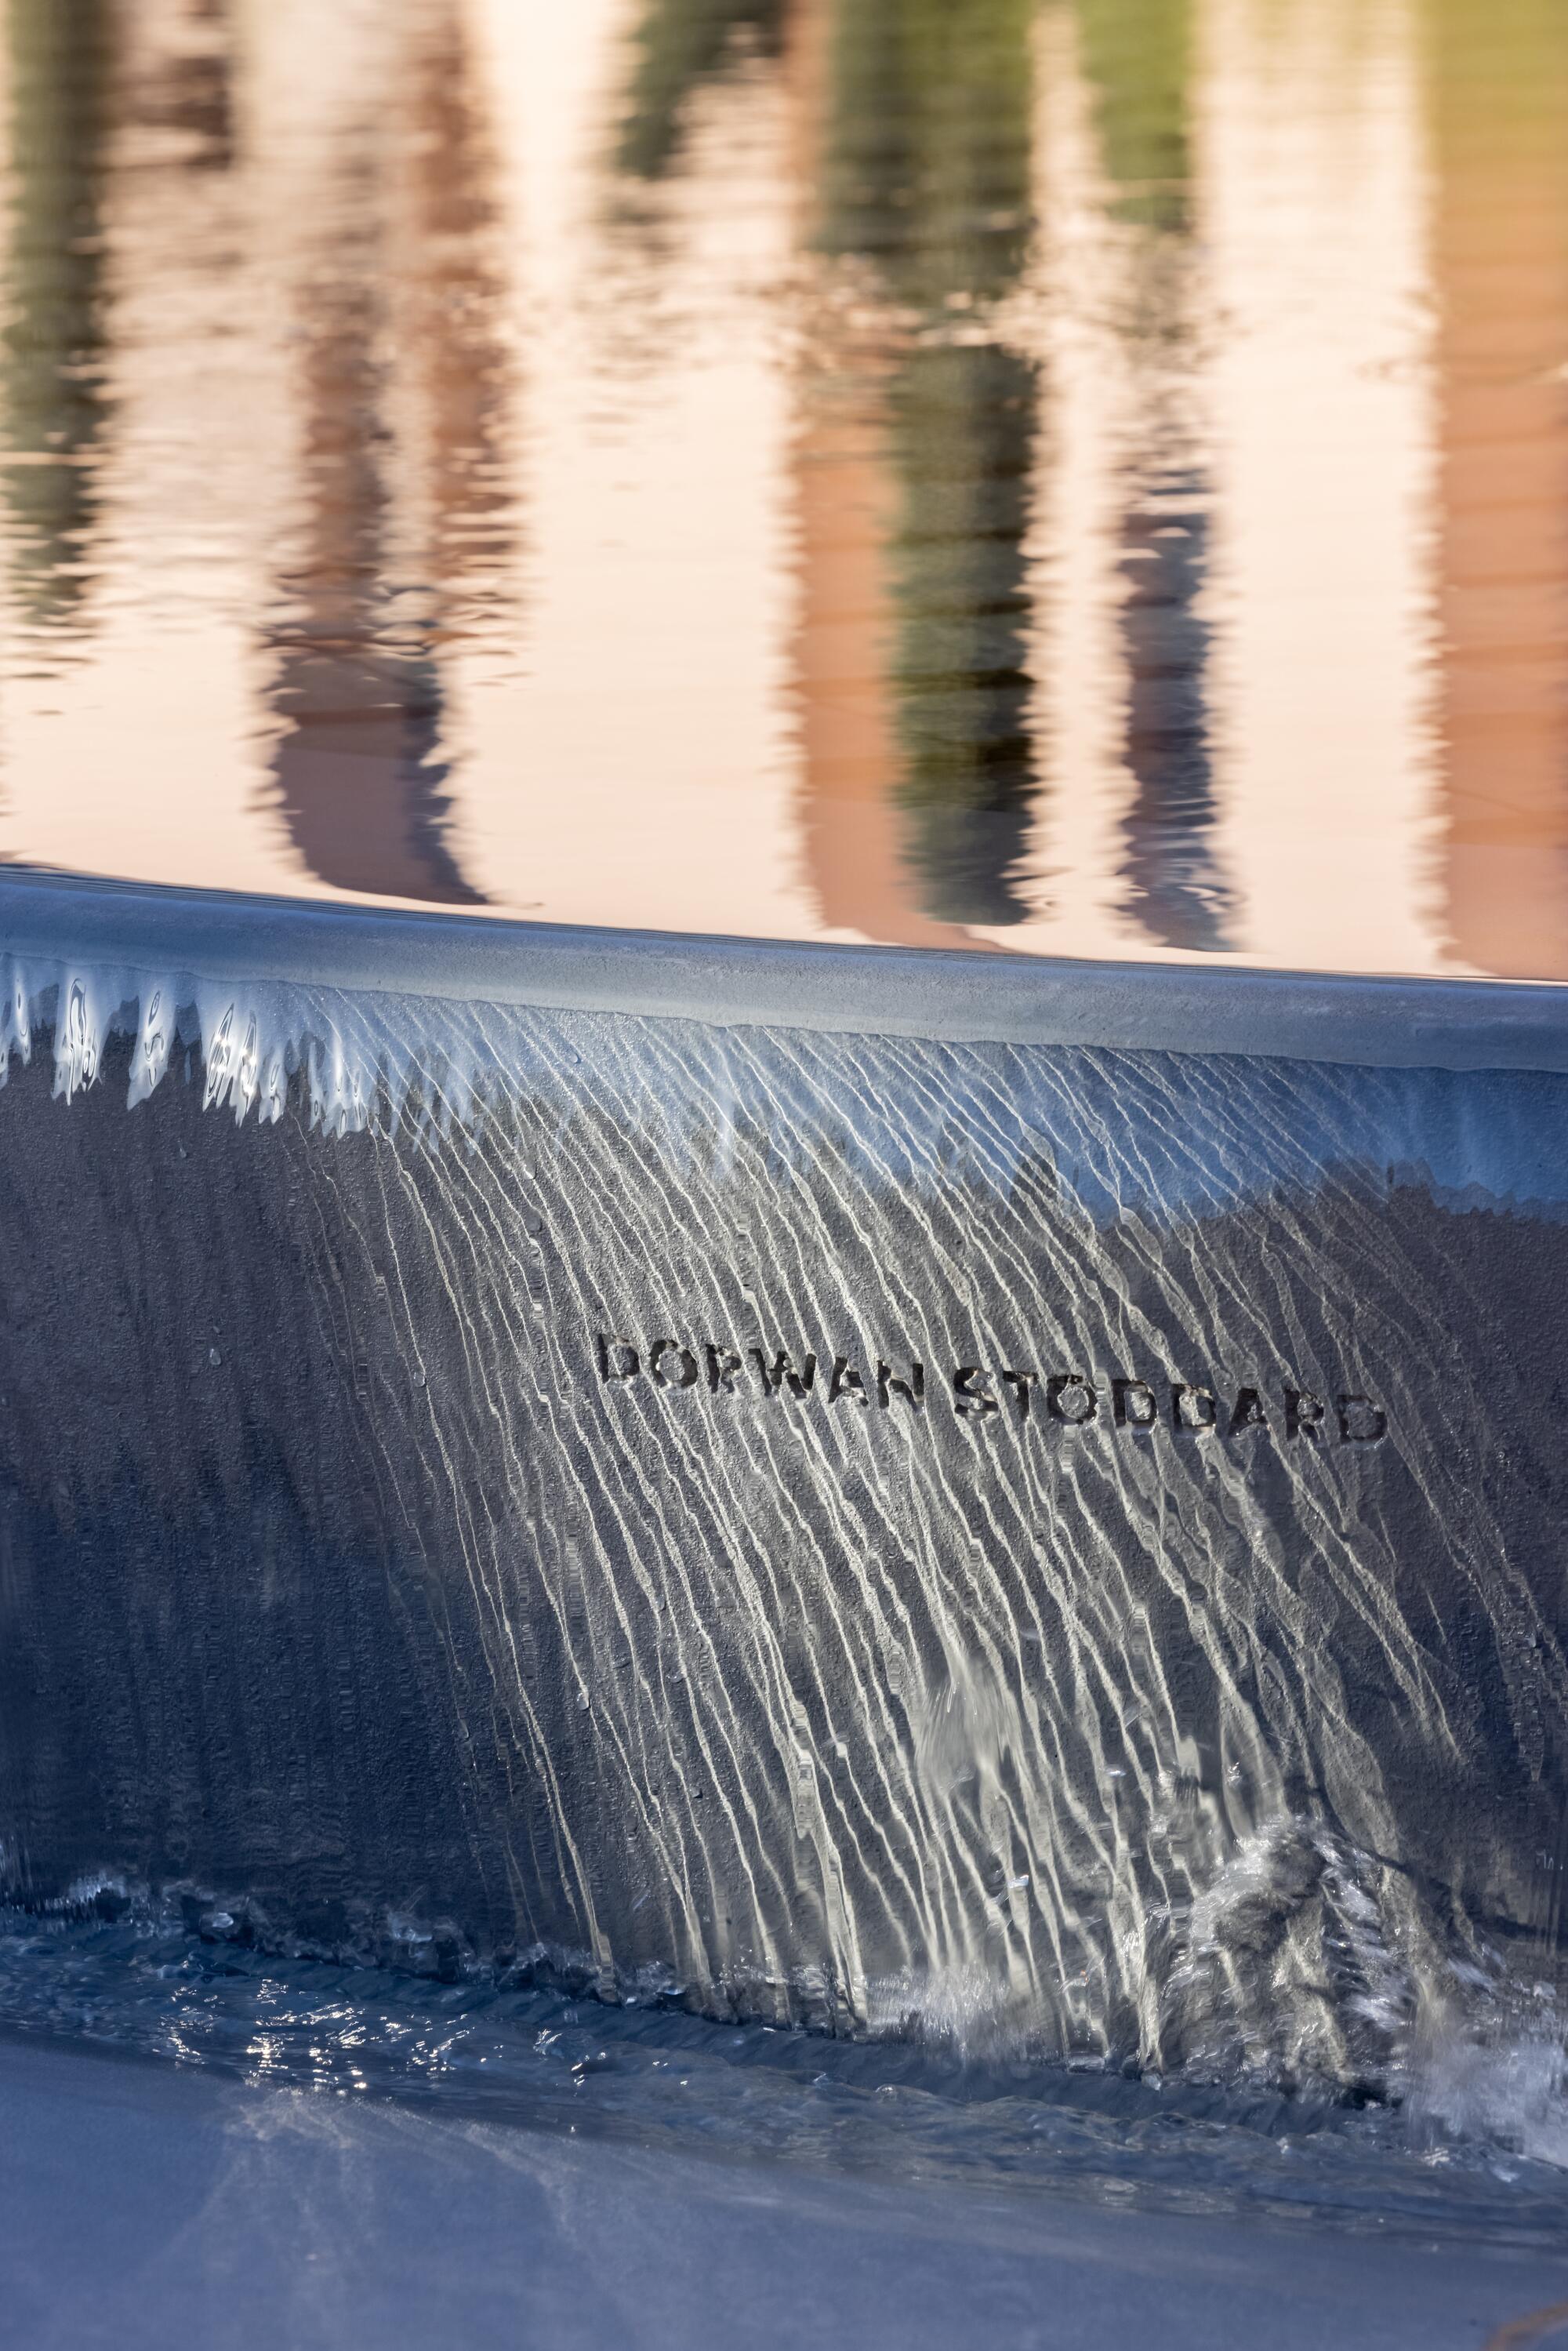 A cascade of water runs over the side of a fountain with the name Dorwan Stoddard embossed.